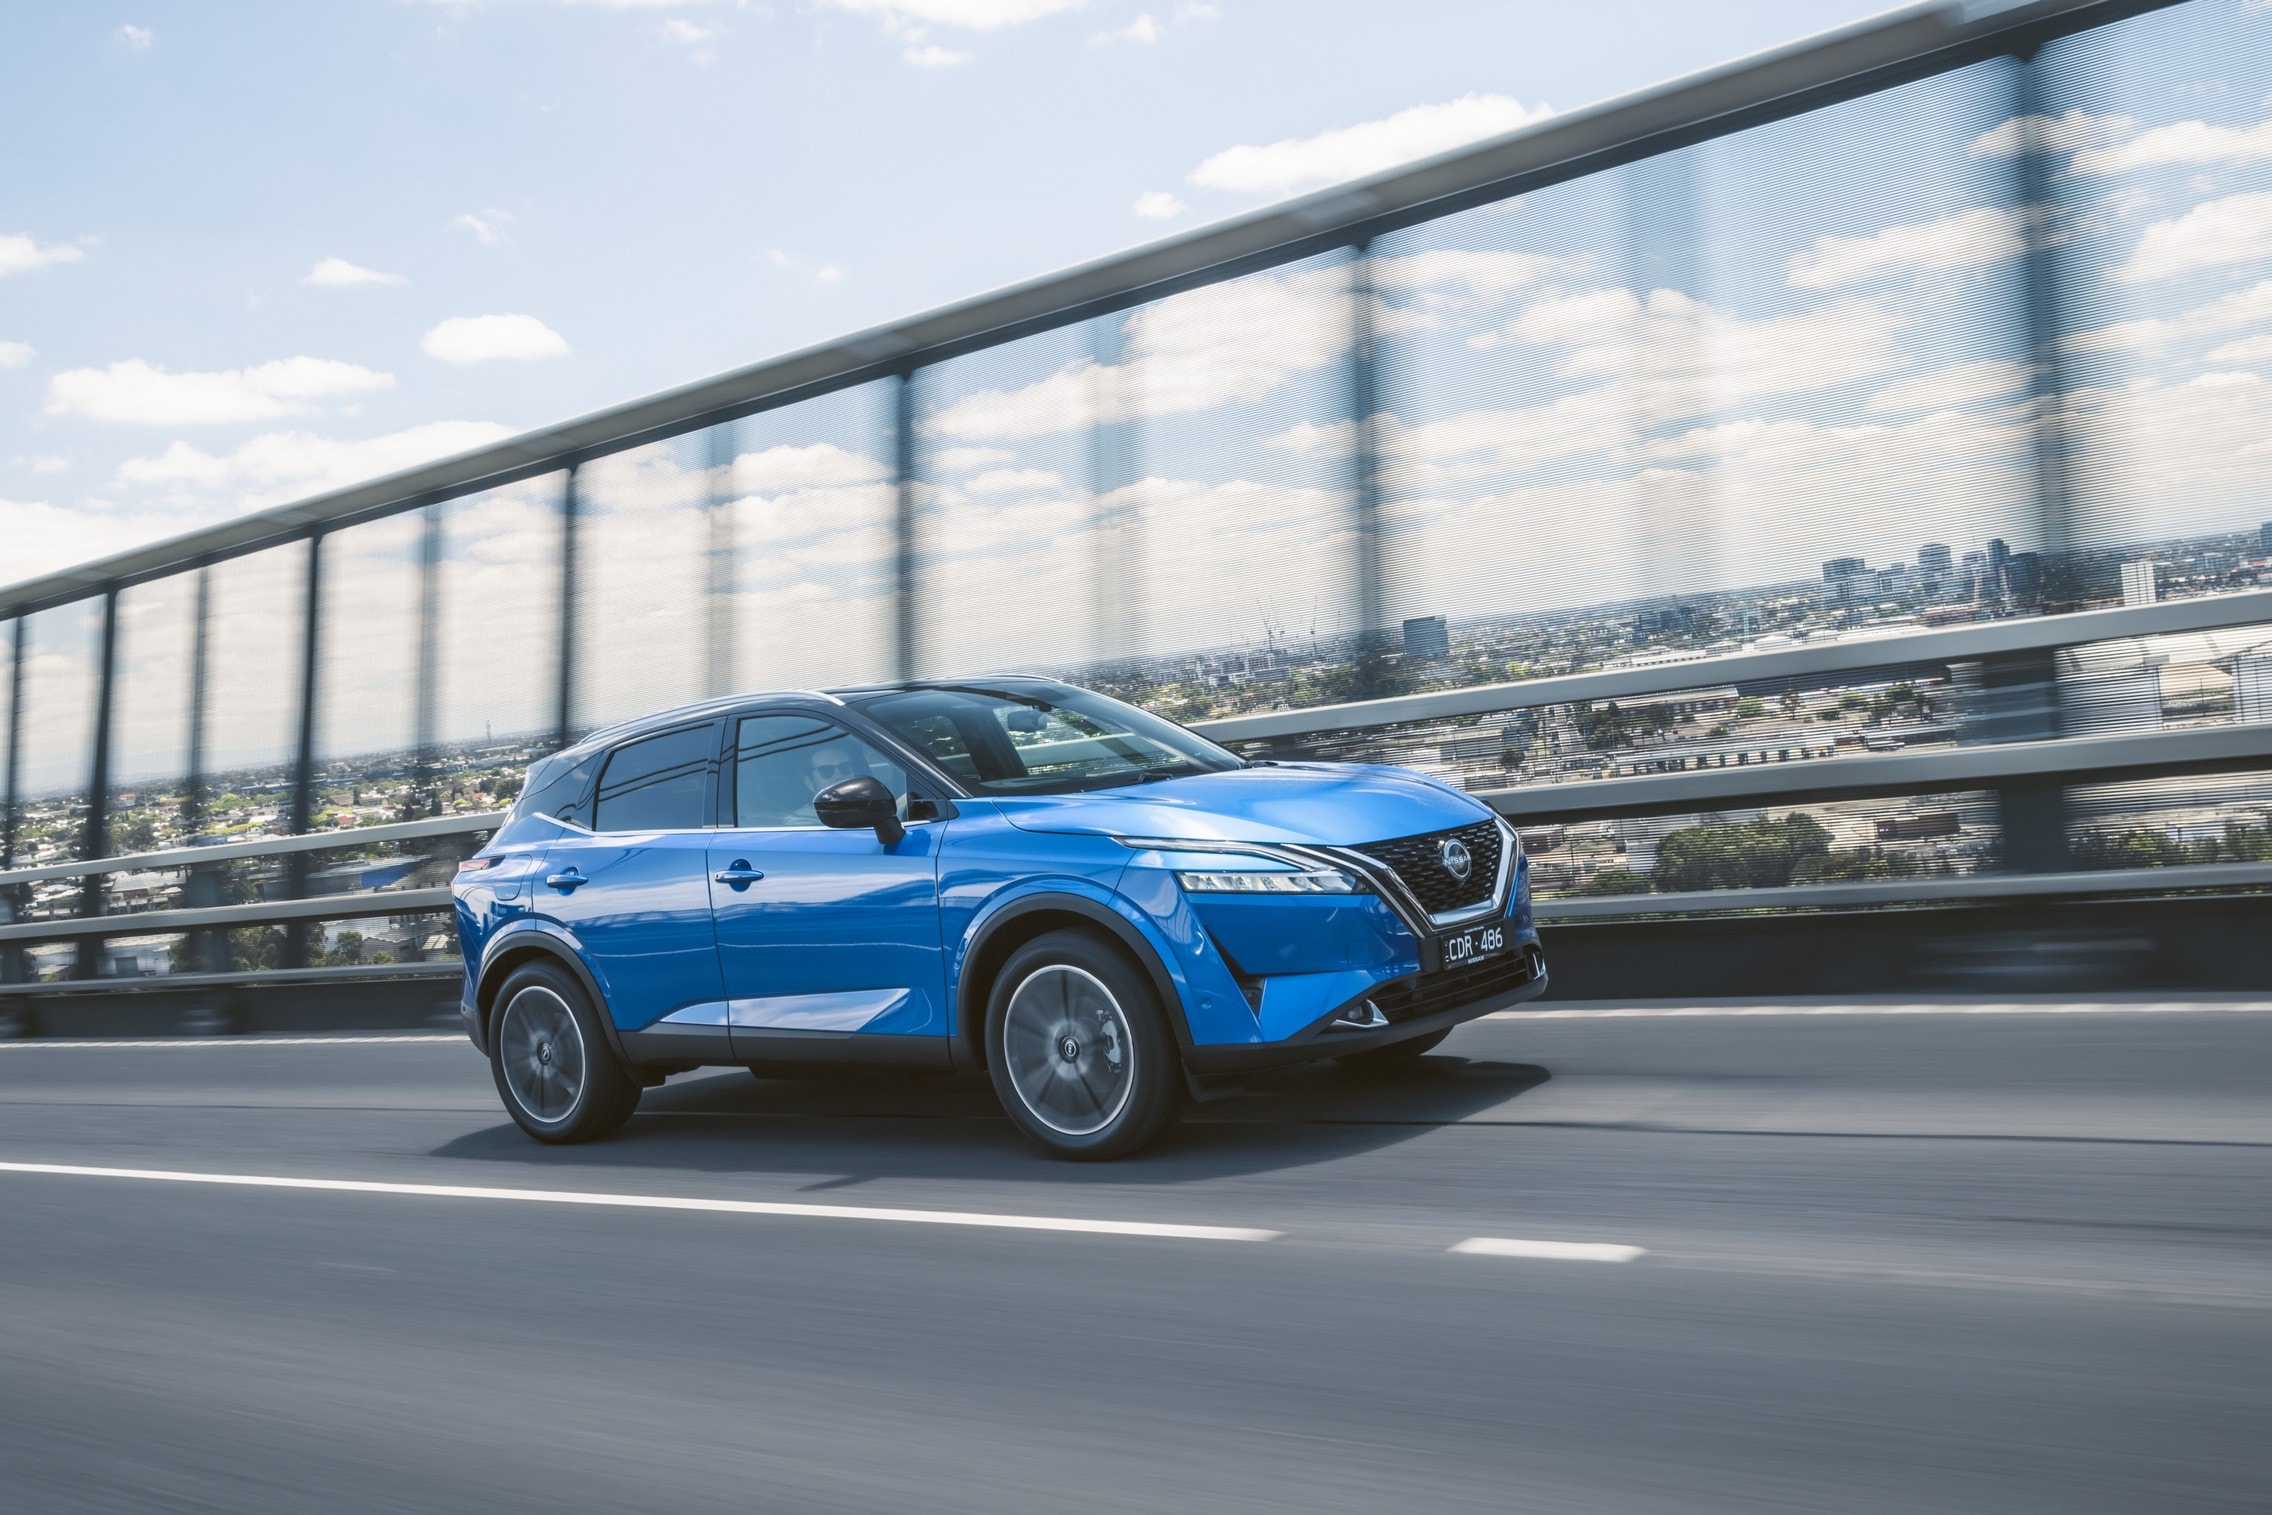 2023 Nissan Qashqai Arrives In Australia With 1.3-Liter Turbo And